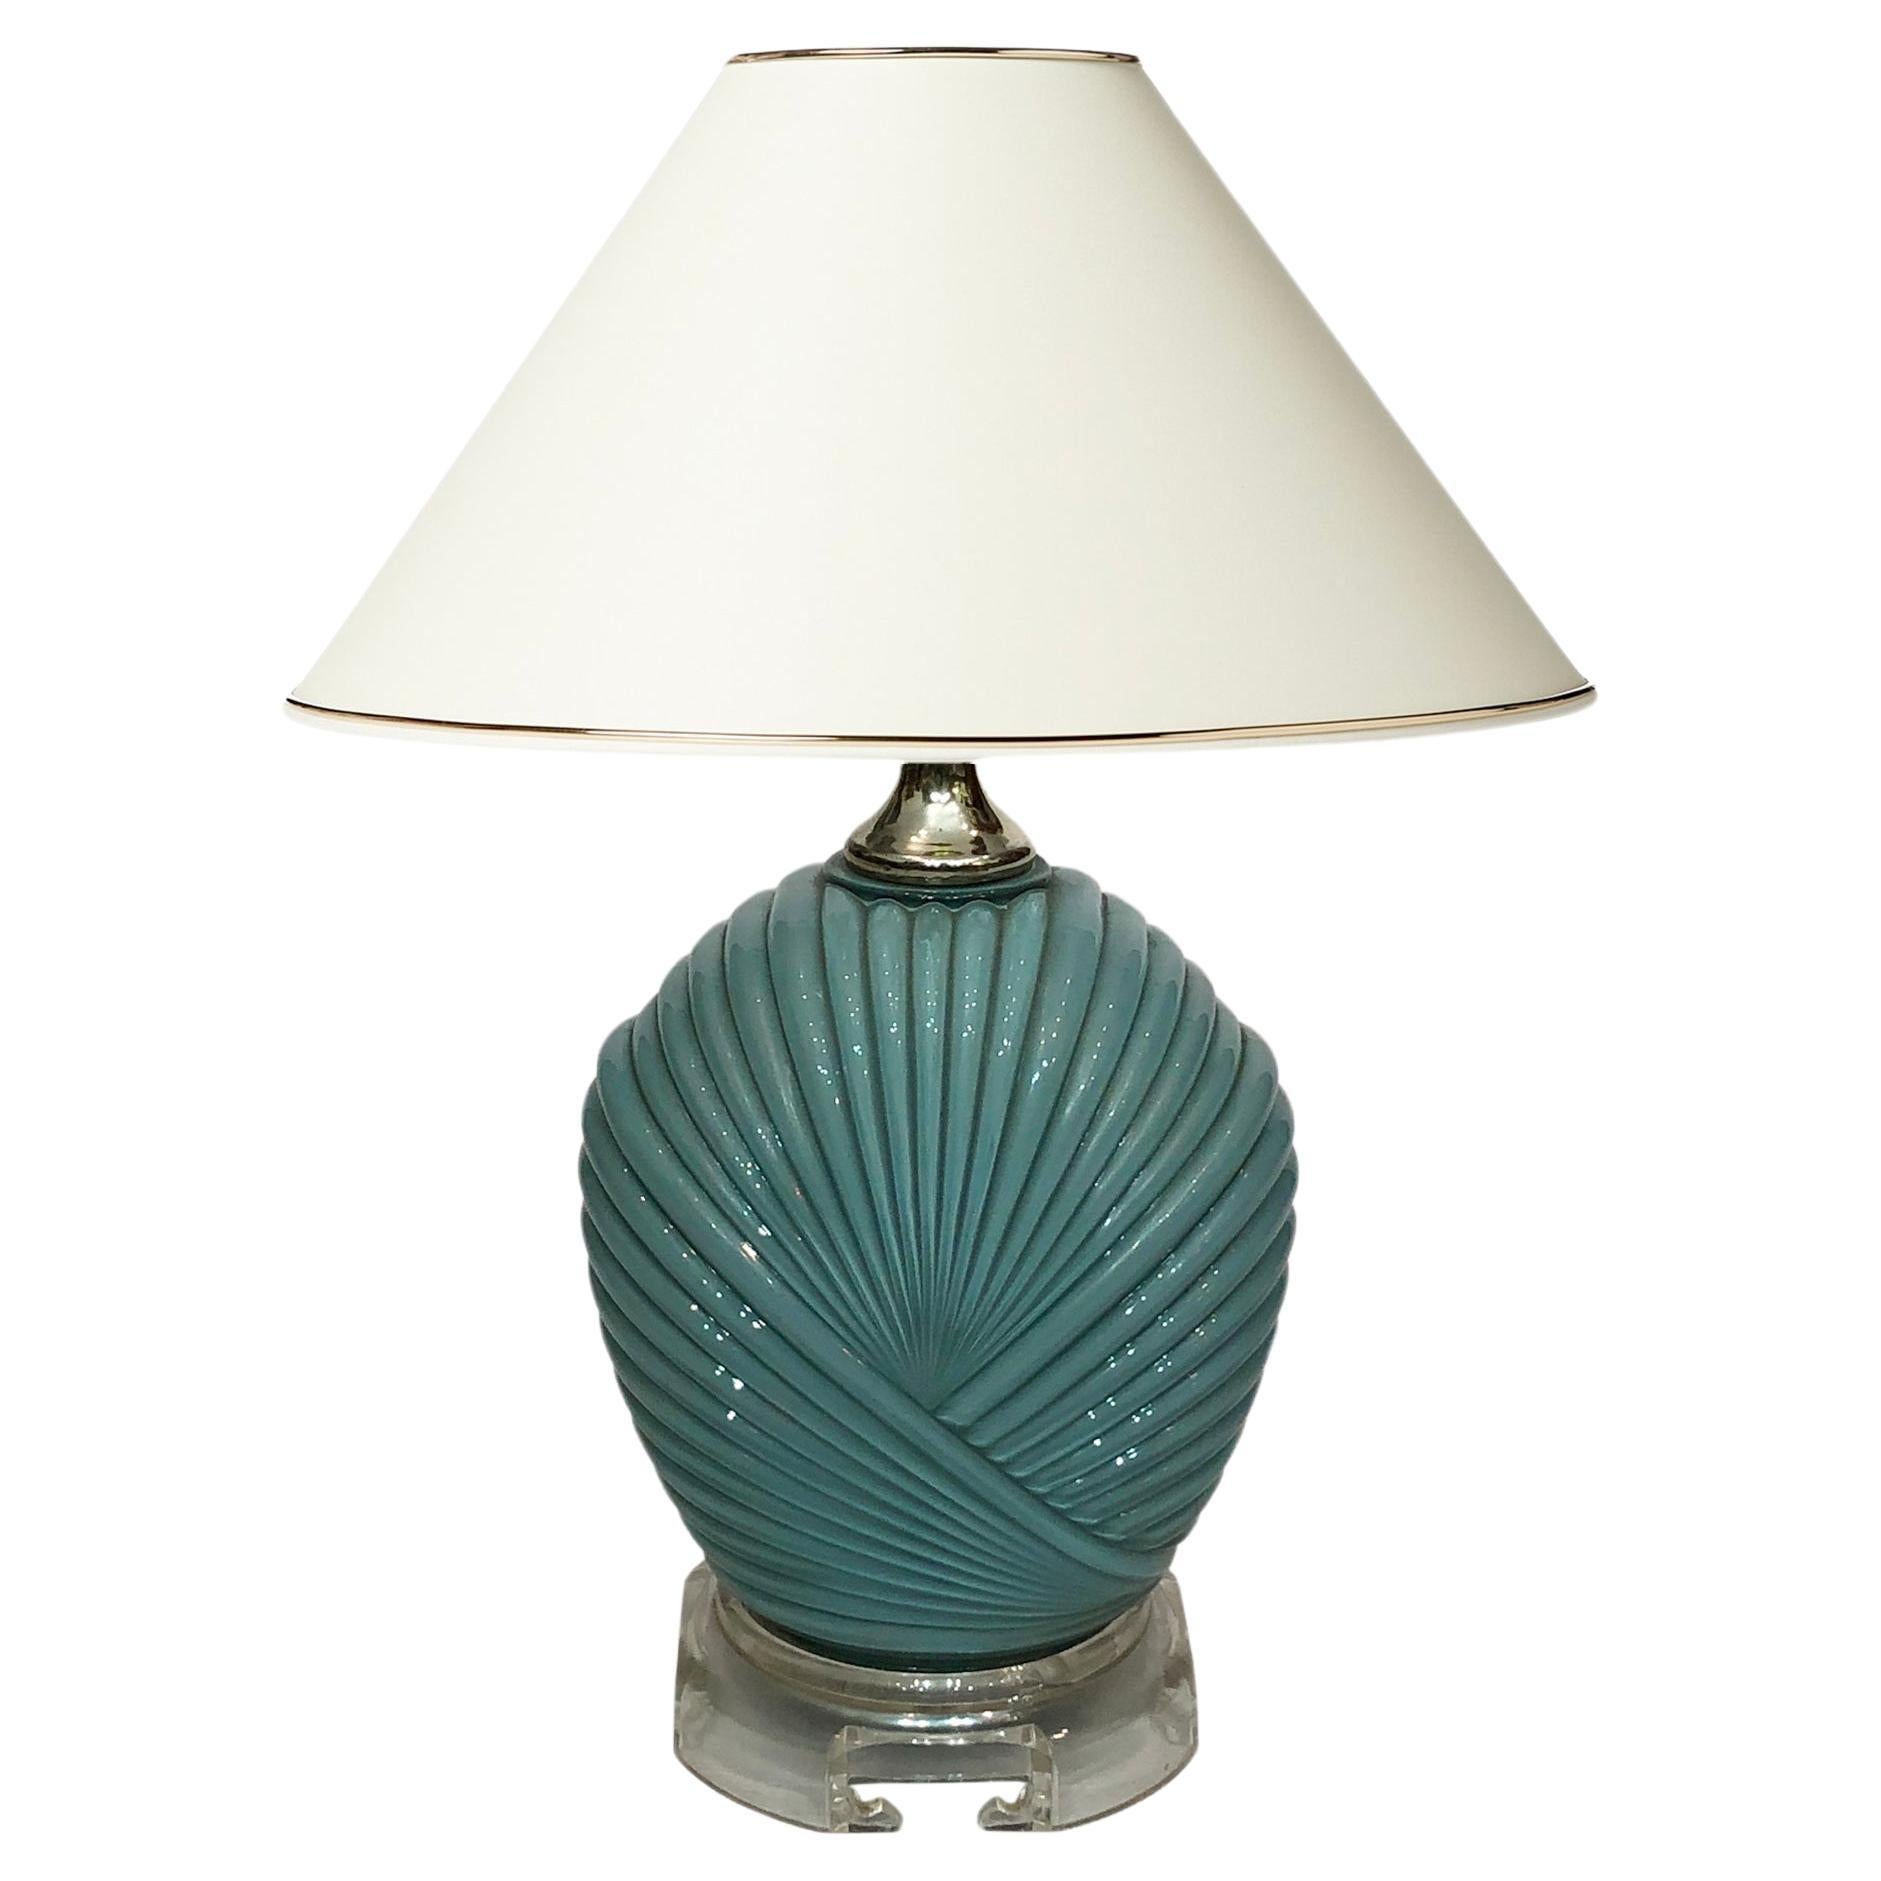 Dusty Blue Candy Table Lamp Turquoise 1970s Hollywood Regency Midcentury Vintage For Sale